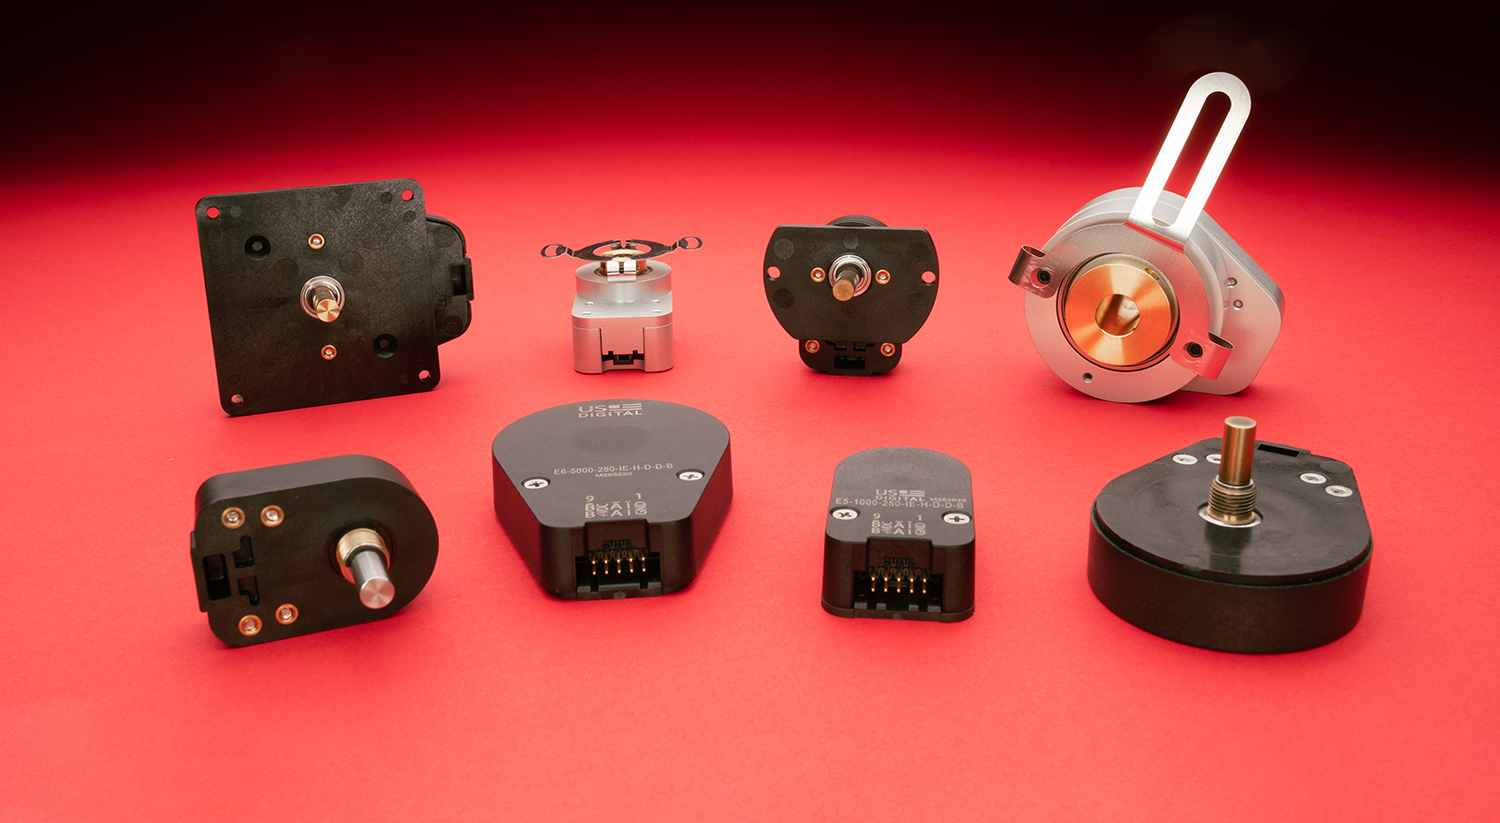 US Digital E5 and E6 series incremental optical encoders on a red paper backdrop